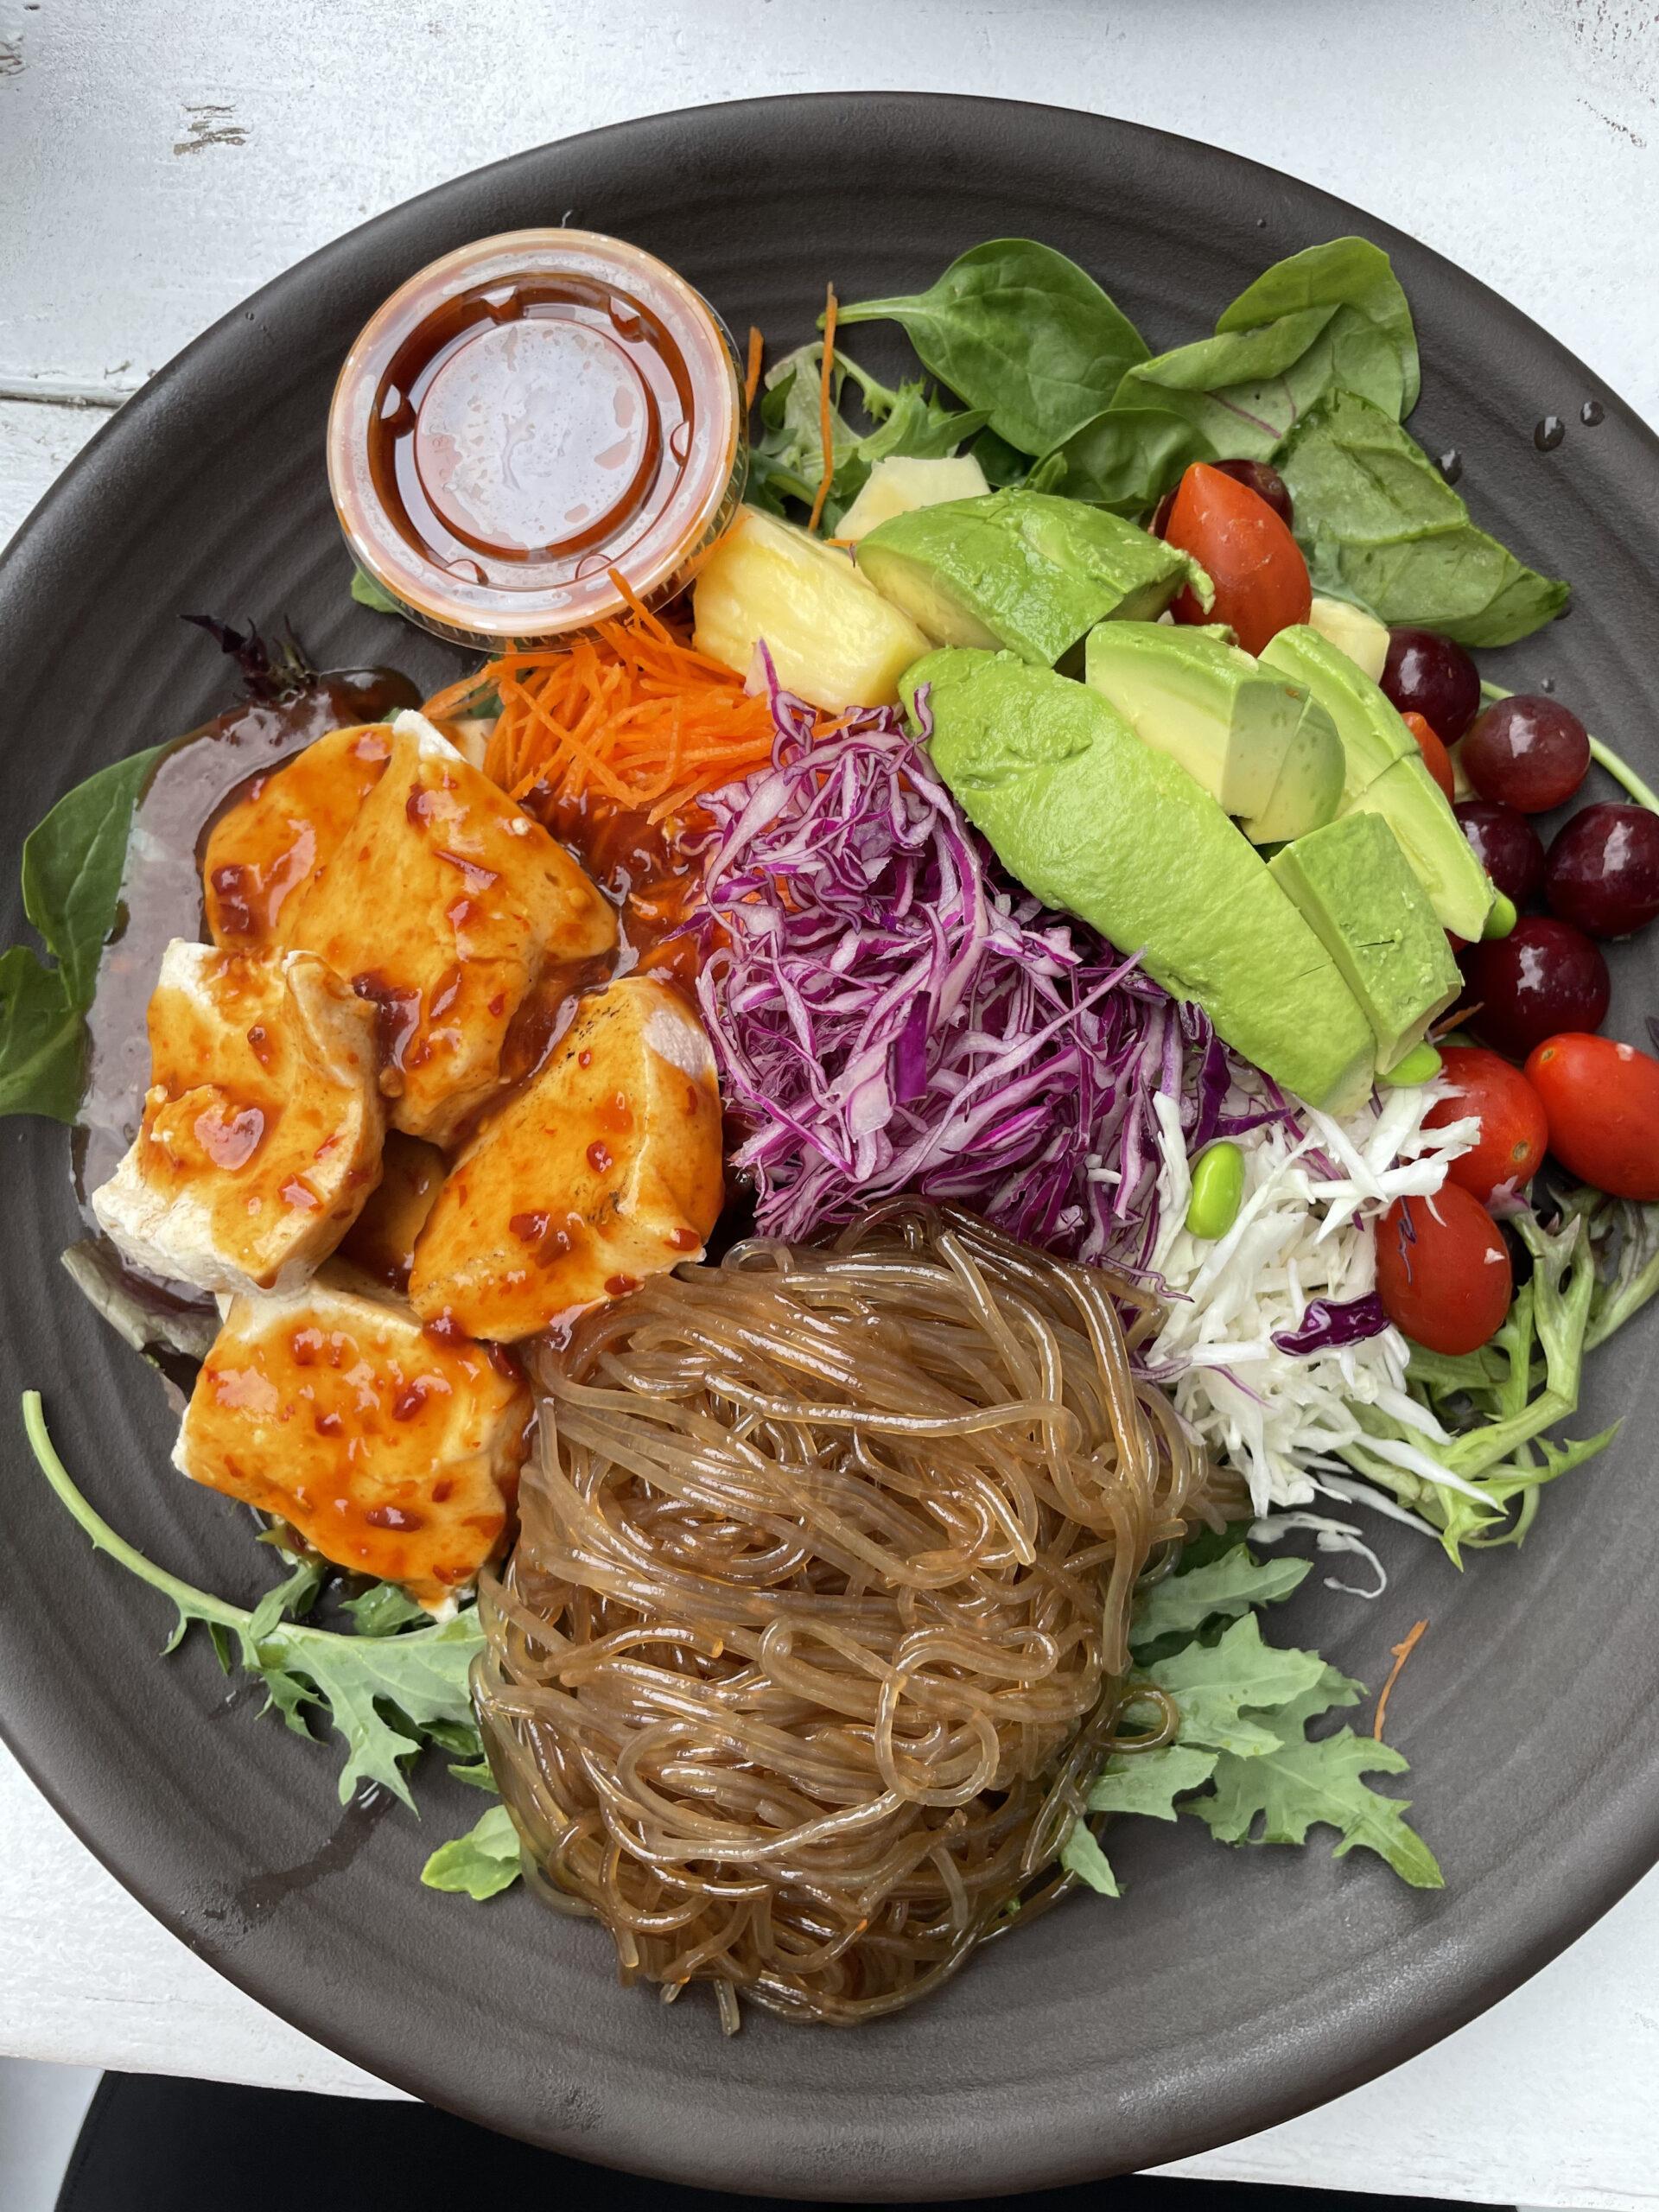 Image of Nancys Sky Garden Spicy Tuna Rainbow Bowl a healthy food option in Austin The bowl is filled with fresh vegetables sweet potato noodles and spicy tuna making it a perfect meal for those looking for a nutritious and delicious meal in Austin